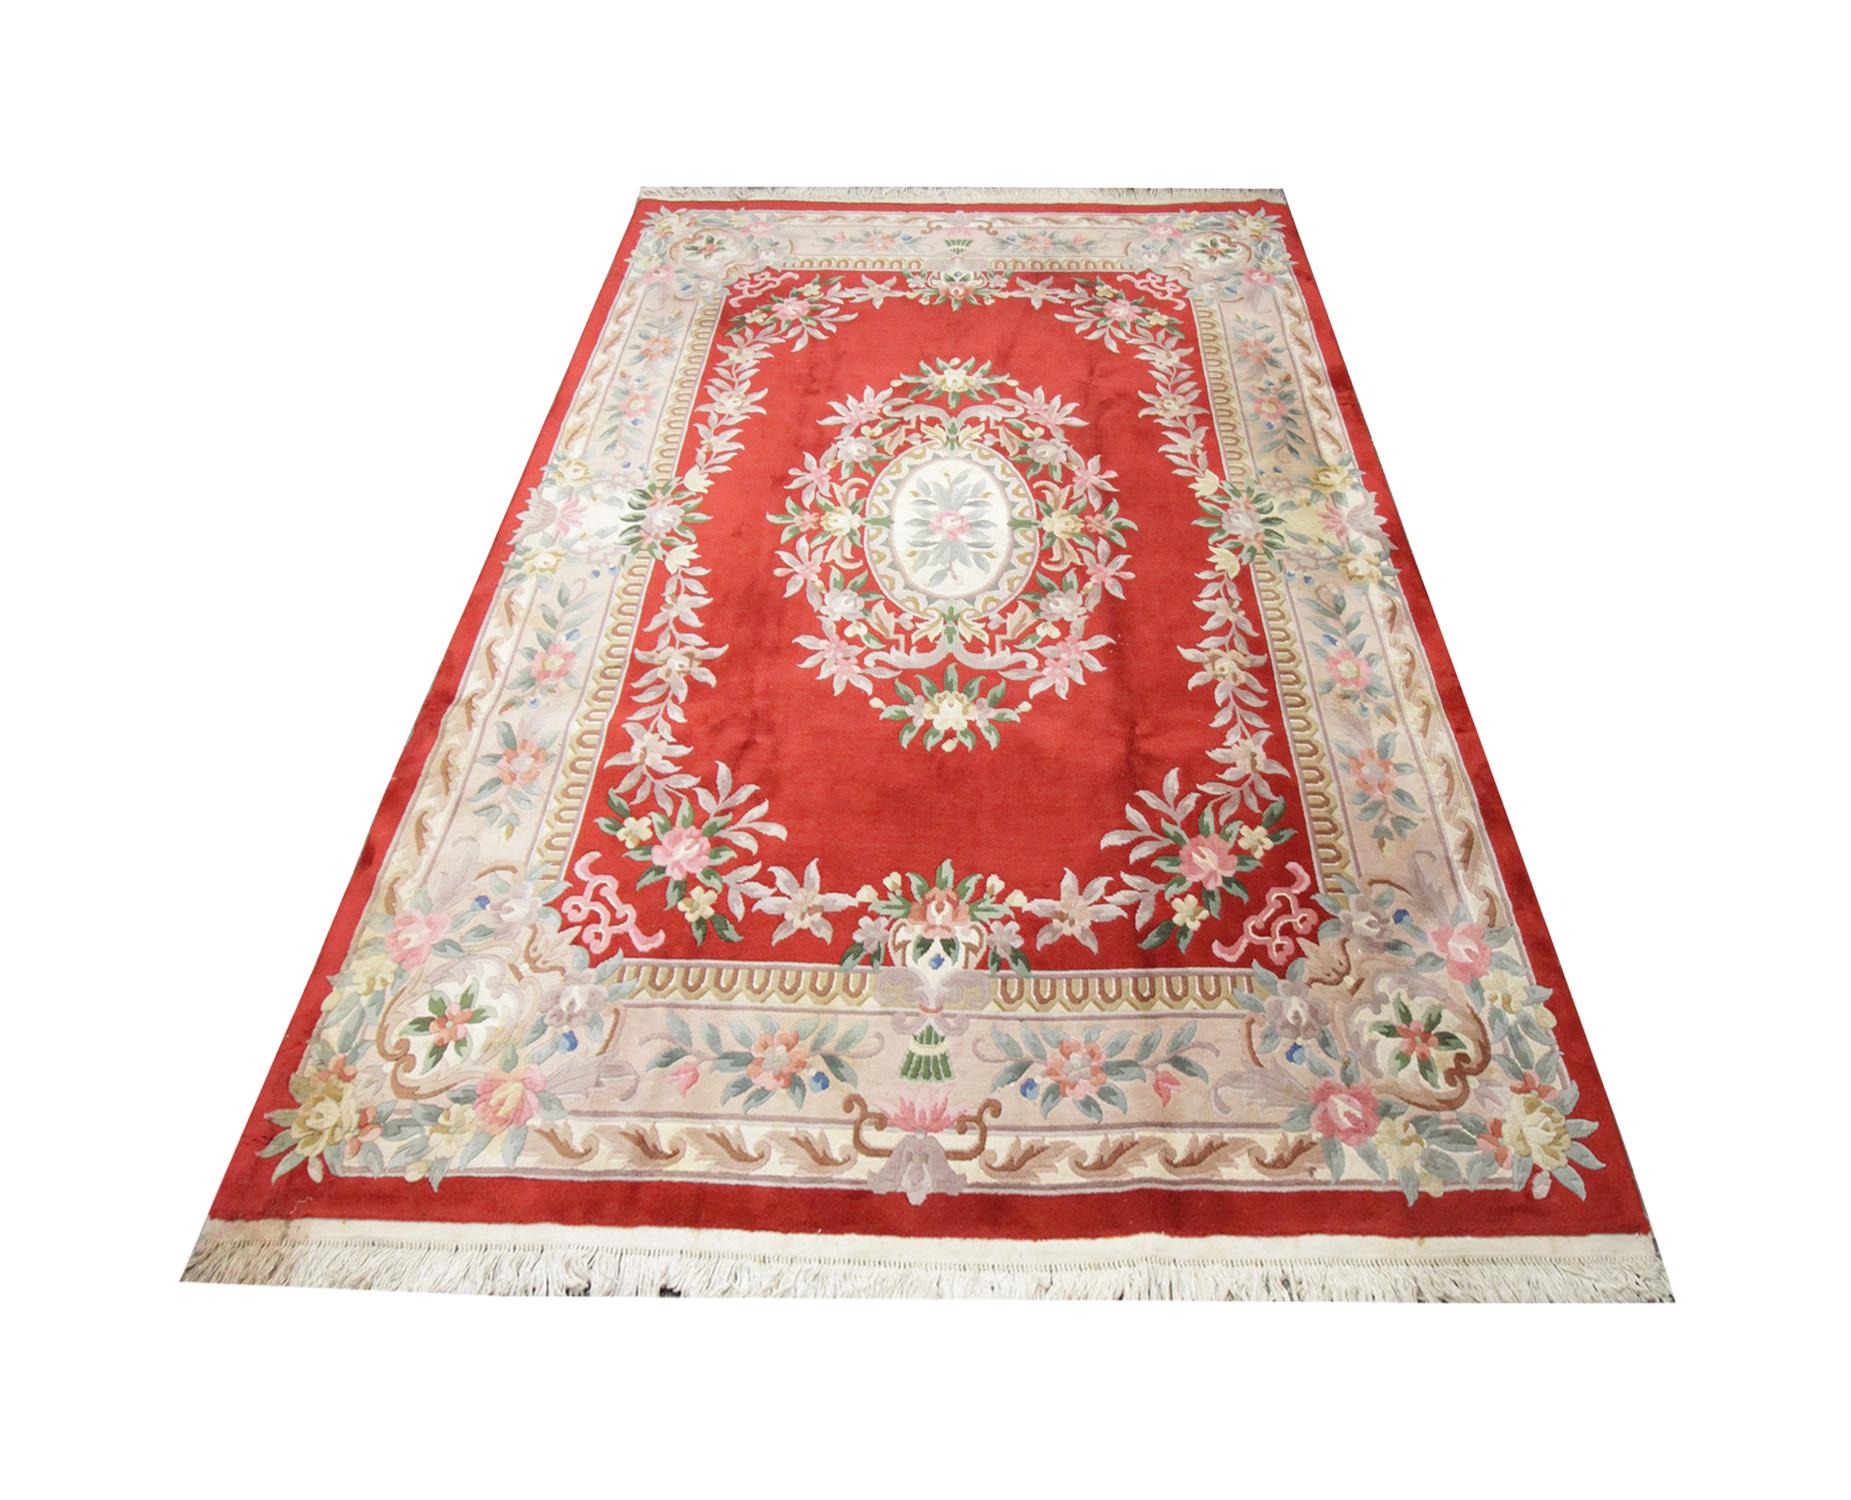 This handmade carpet traditional vintage handwoven Chinese area rug has been handwoven to perfection with a floral meandering border supported on a beige linear background. The central design is a beautiful intricate floral bouquet which sits on a